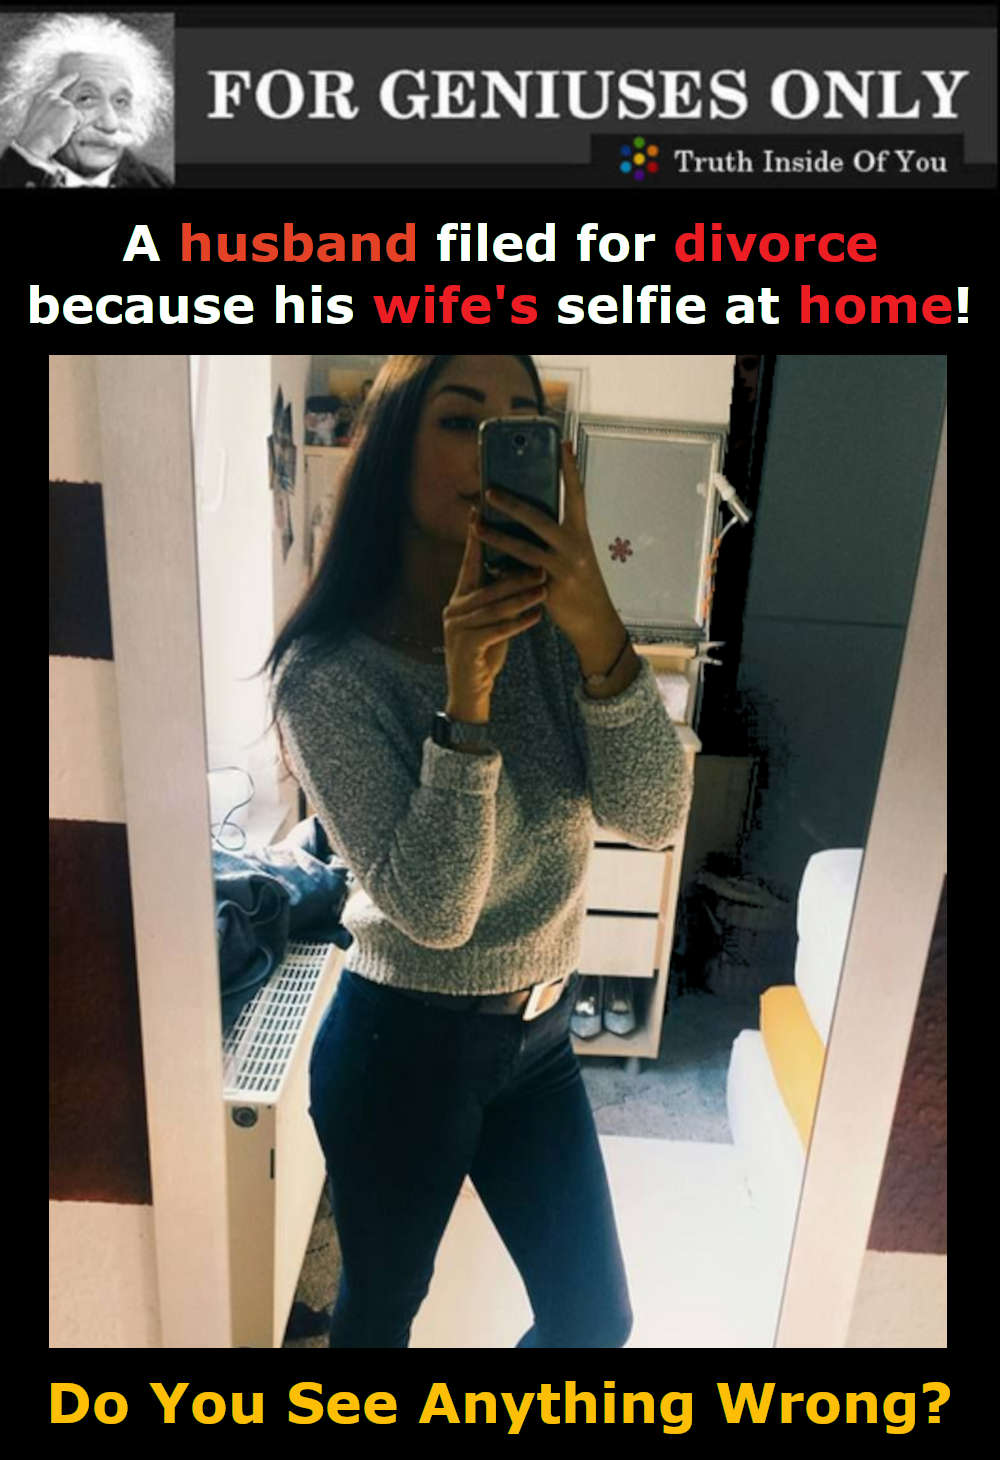 A husband filed for divorce because his wife's selfie at home! Do You See Anything Wrong?